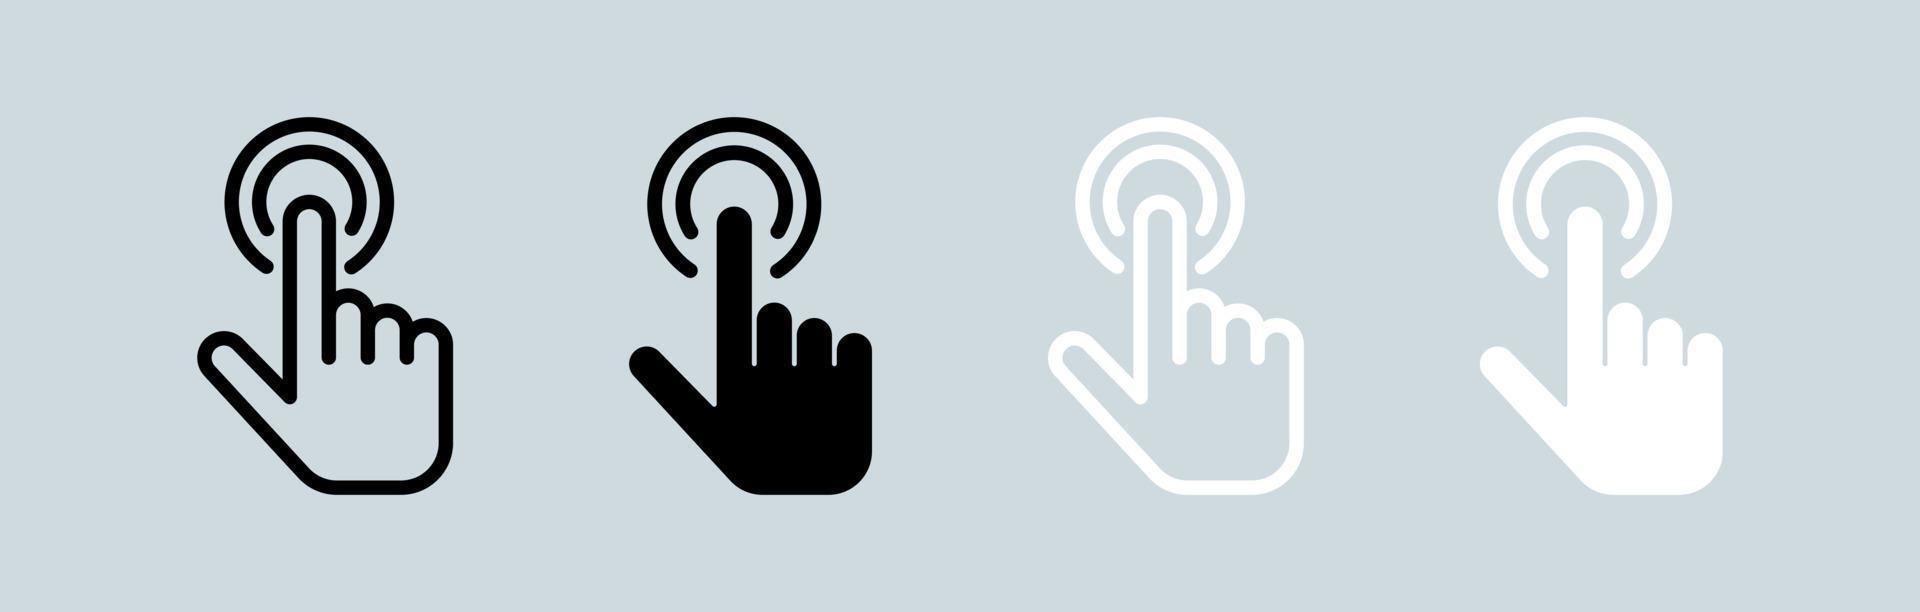 Touch icon set in black and white. Tap signs vector illustration.